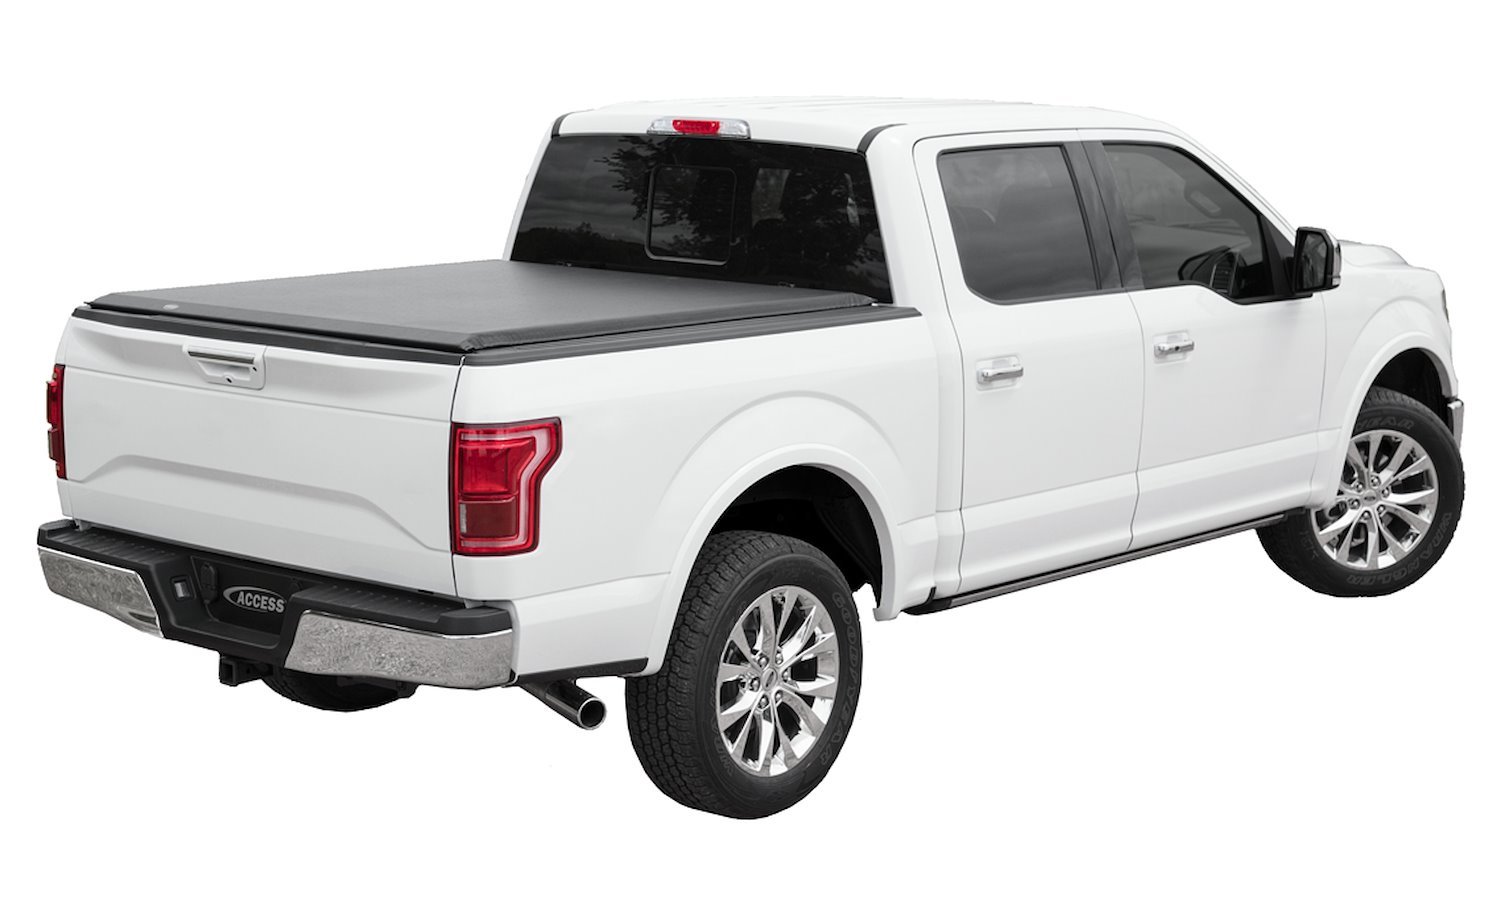 Original Roll-Up Tonneau Cover, Fits Select Ford F-150,